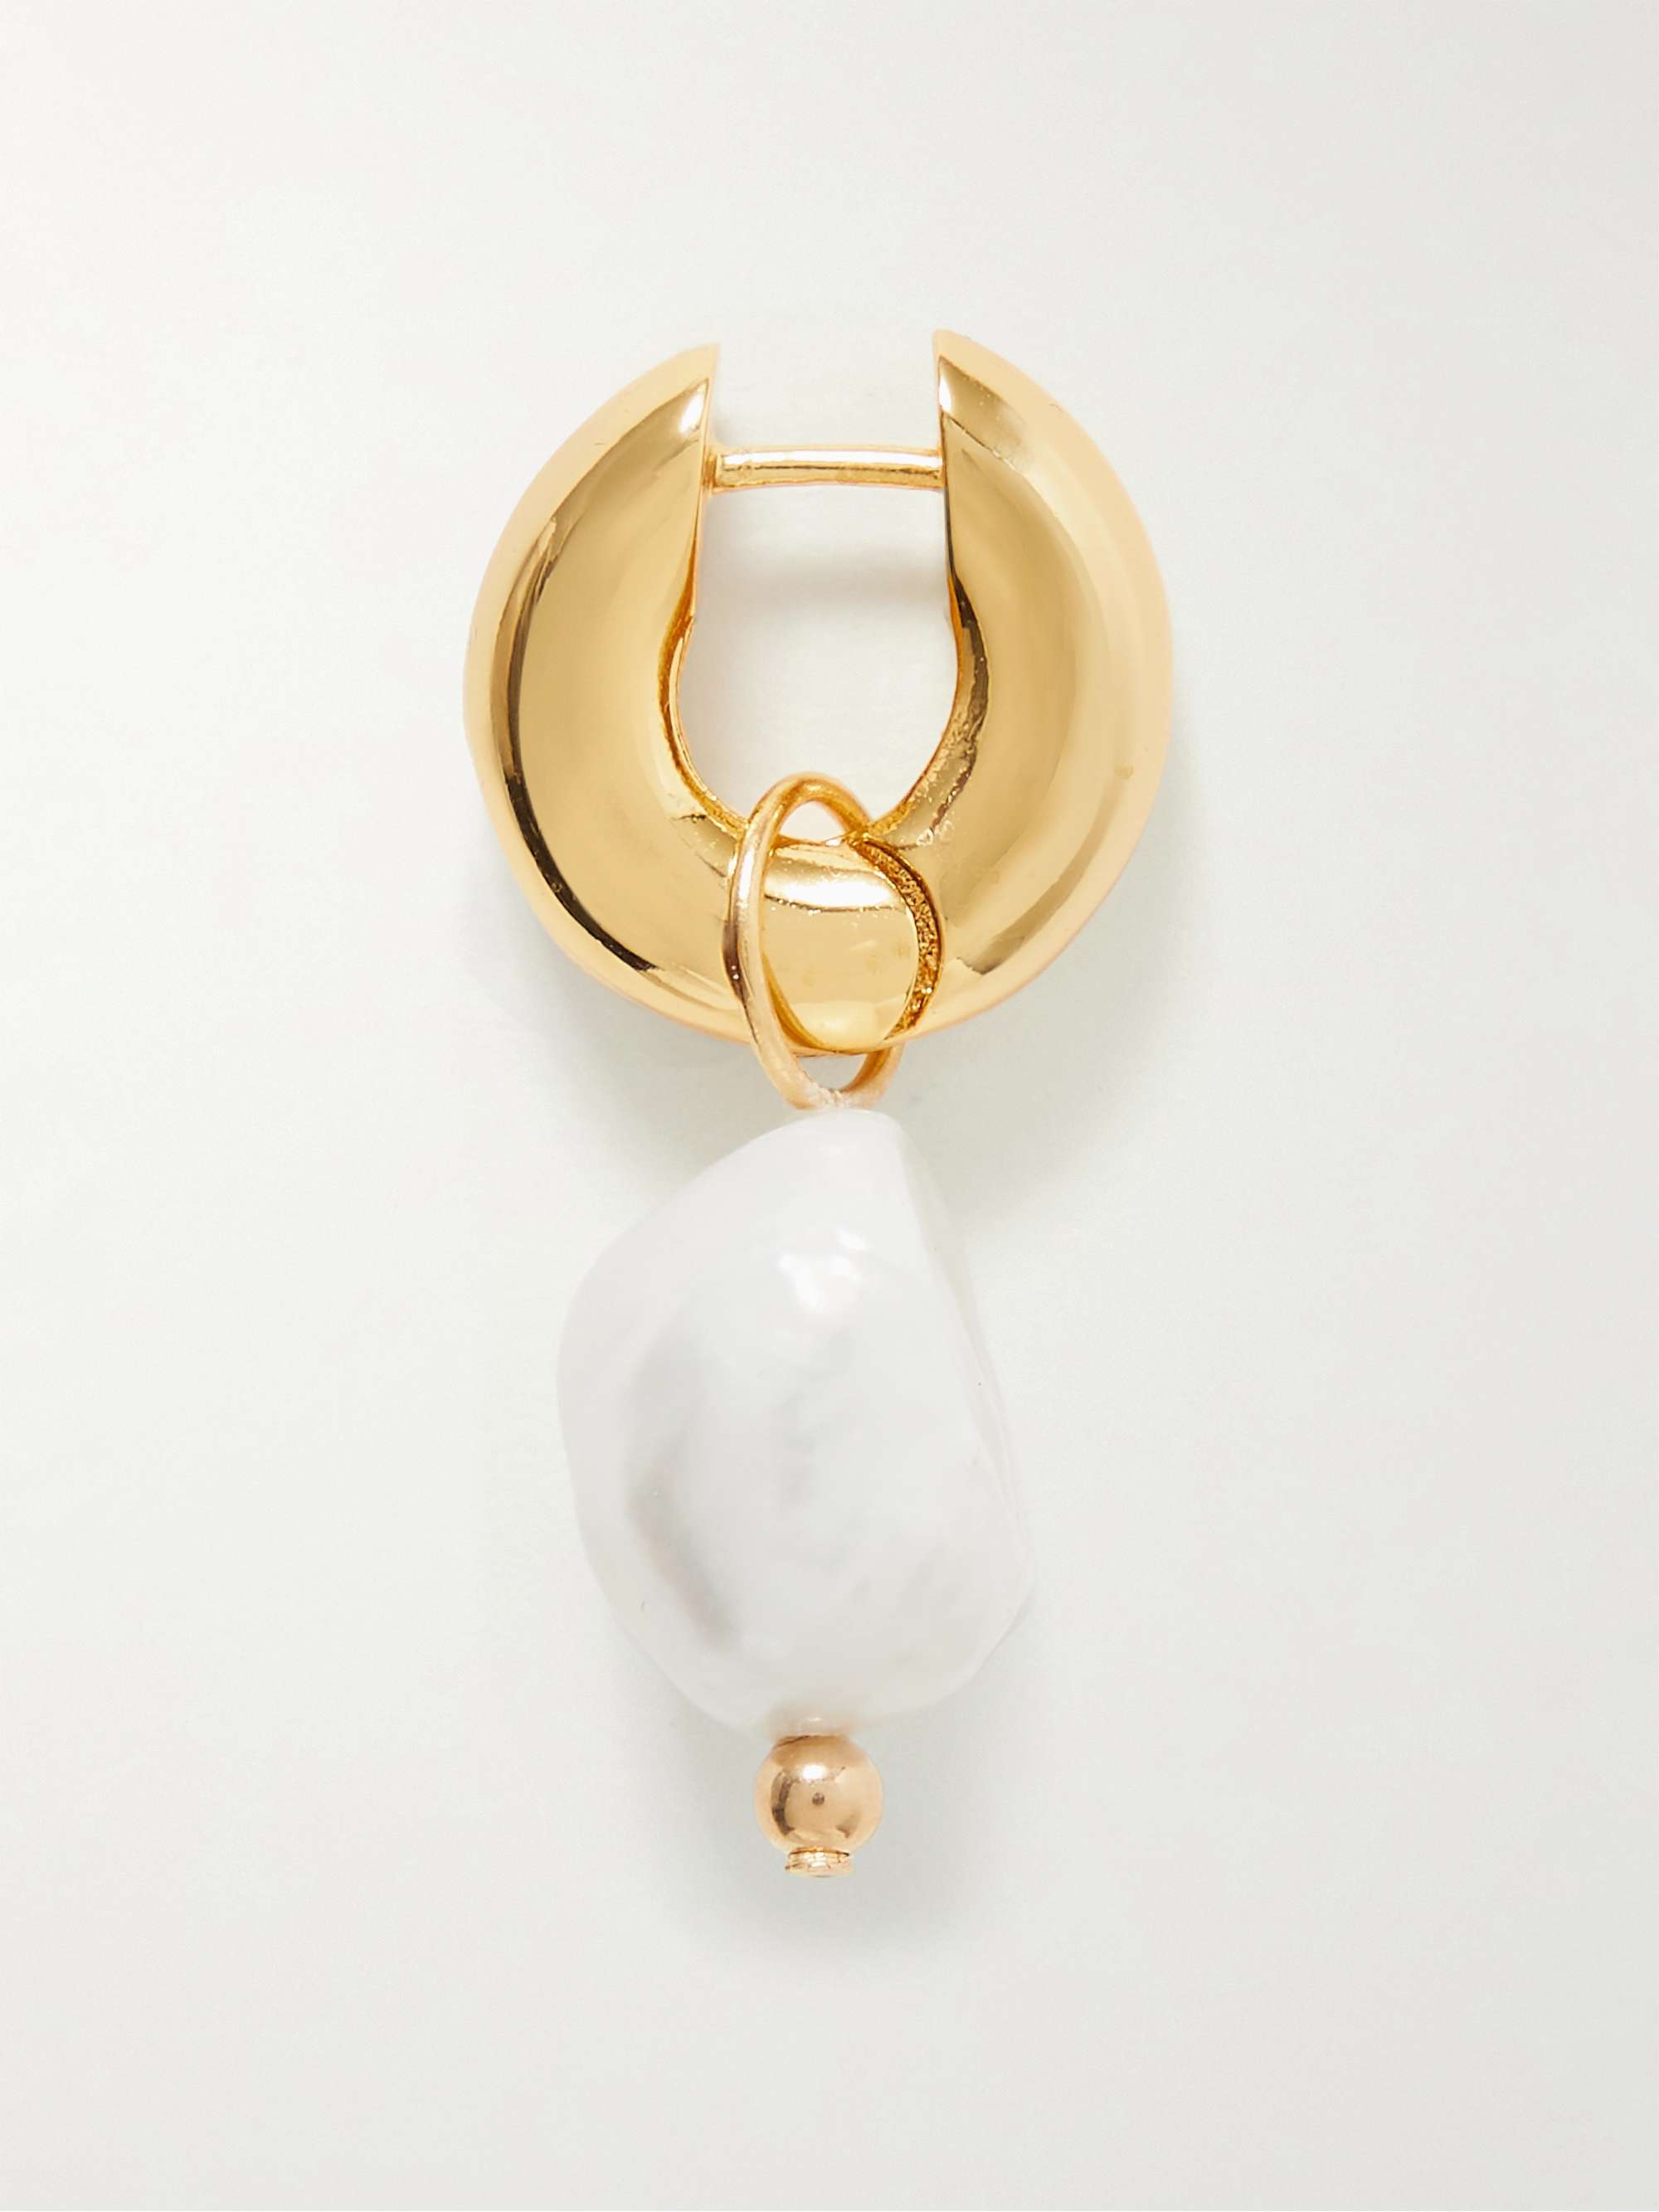 ÉLIOU Belinda Gold-Filled and Pearl Single Earring